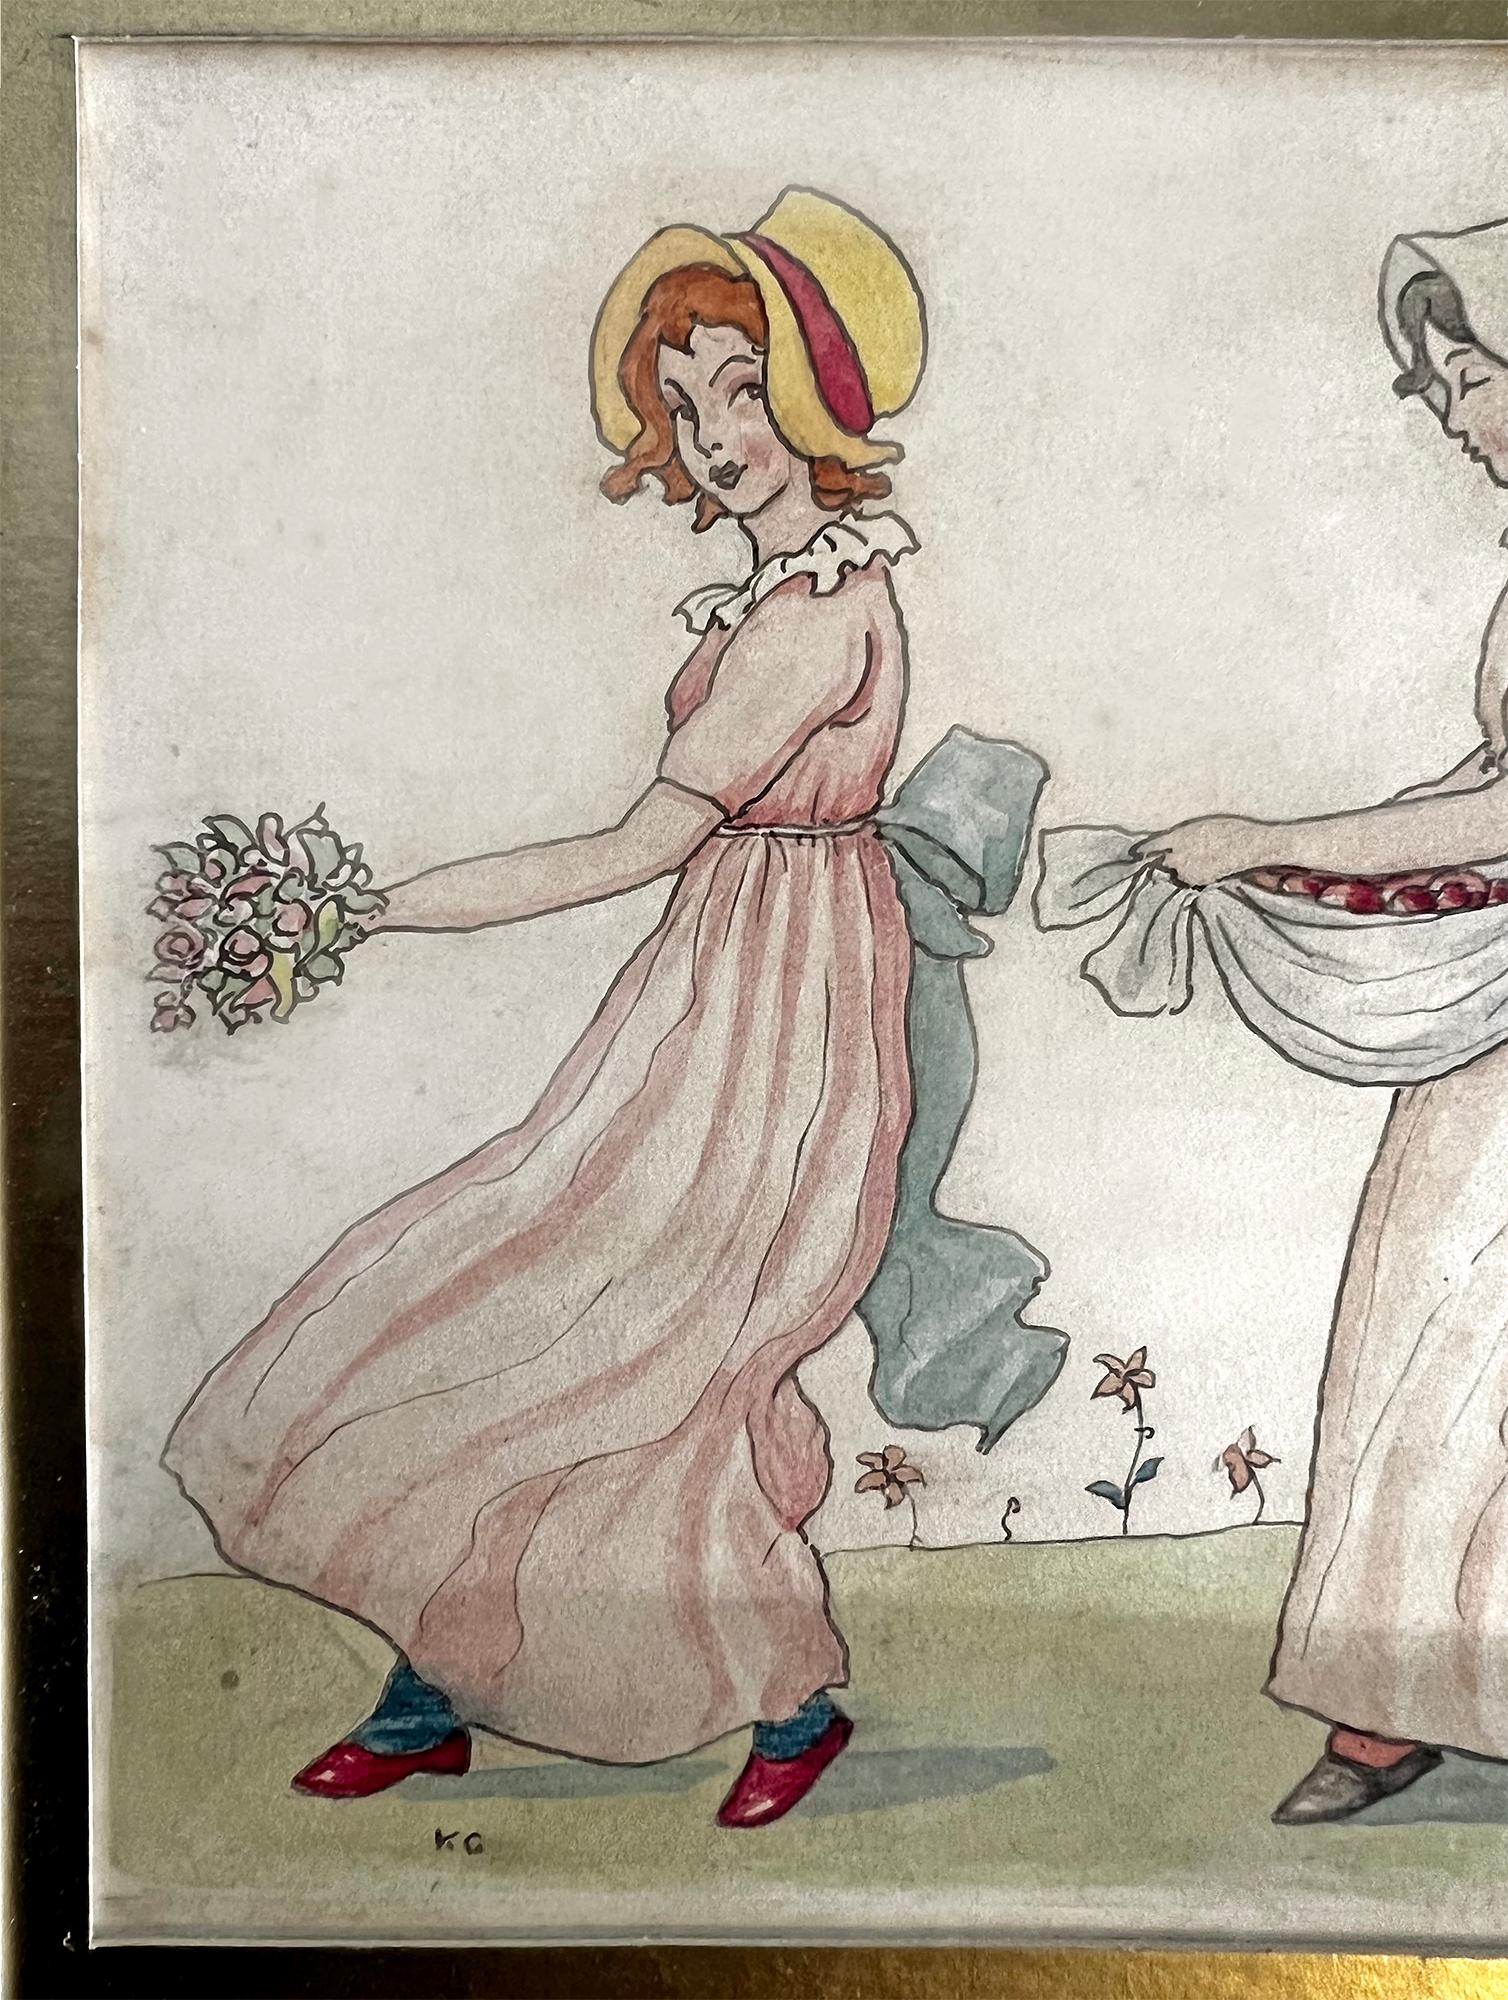 Procession Four girls with flowers - English Female Illustrator - Art by kate Greenaway